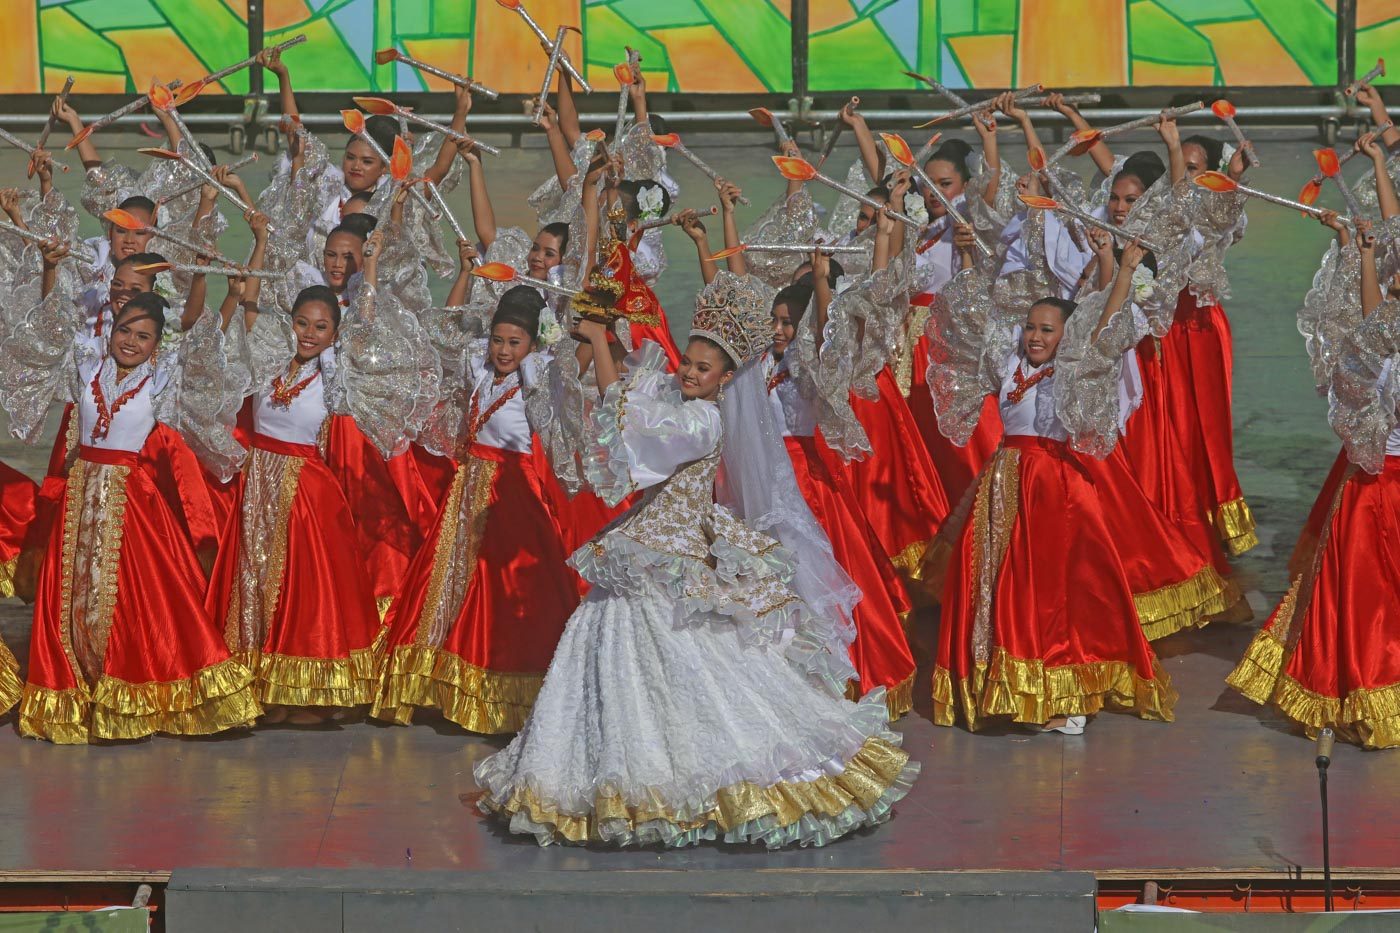 After cancellation of physical events, virtual Sinulog postponed too